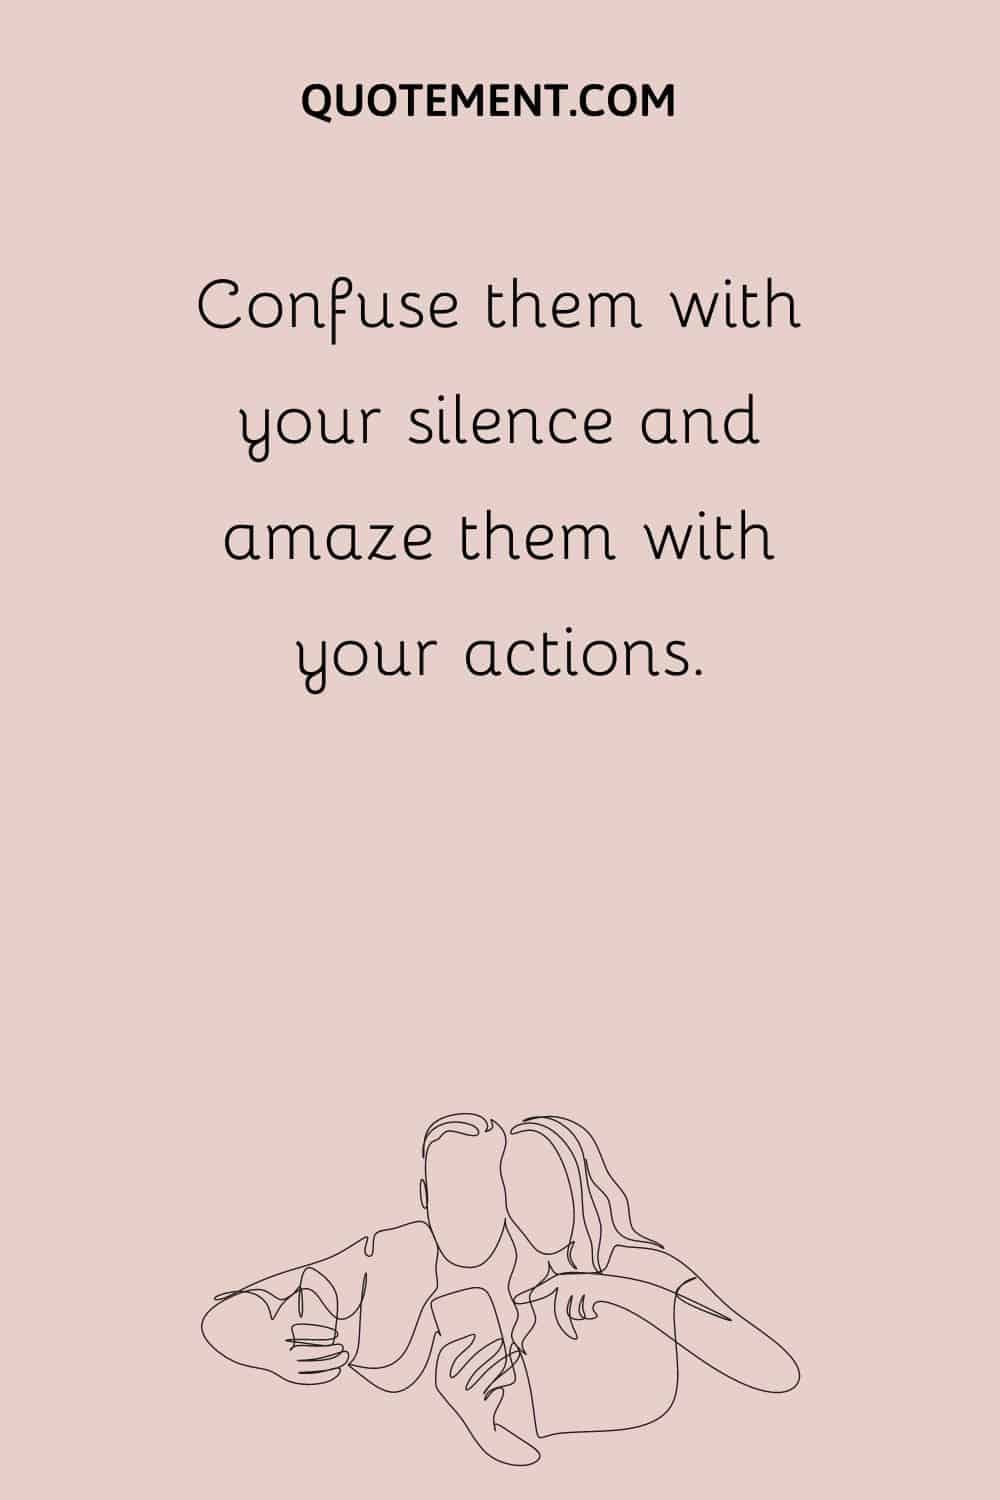 Confuse them with your silence and amaze them with your actions